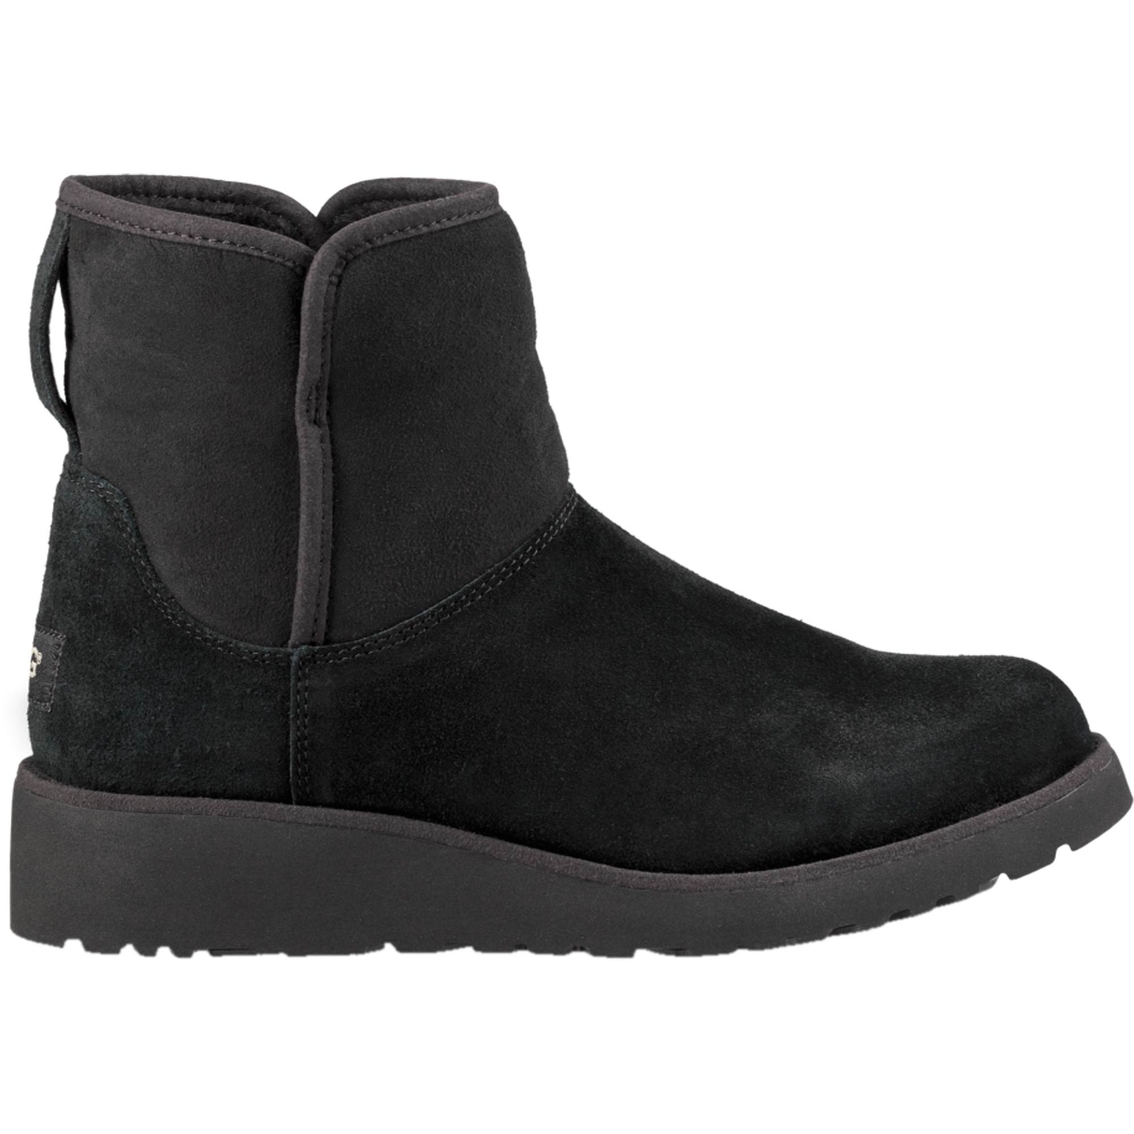 Ugg Kristin Slim Wedge Boots | Booties | Shoes | Shop The Exchange